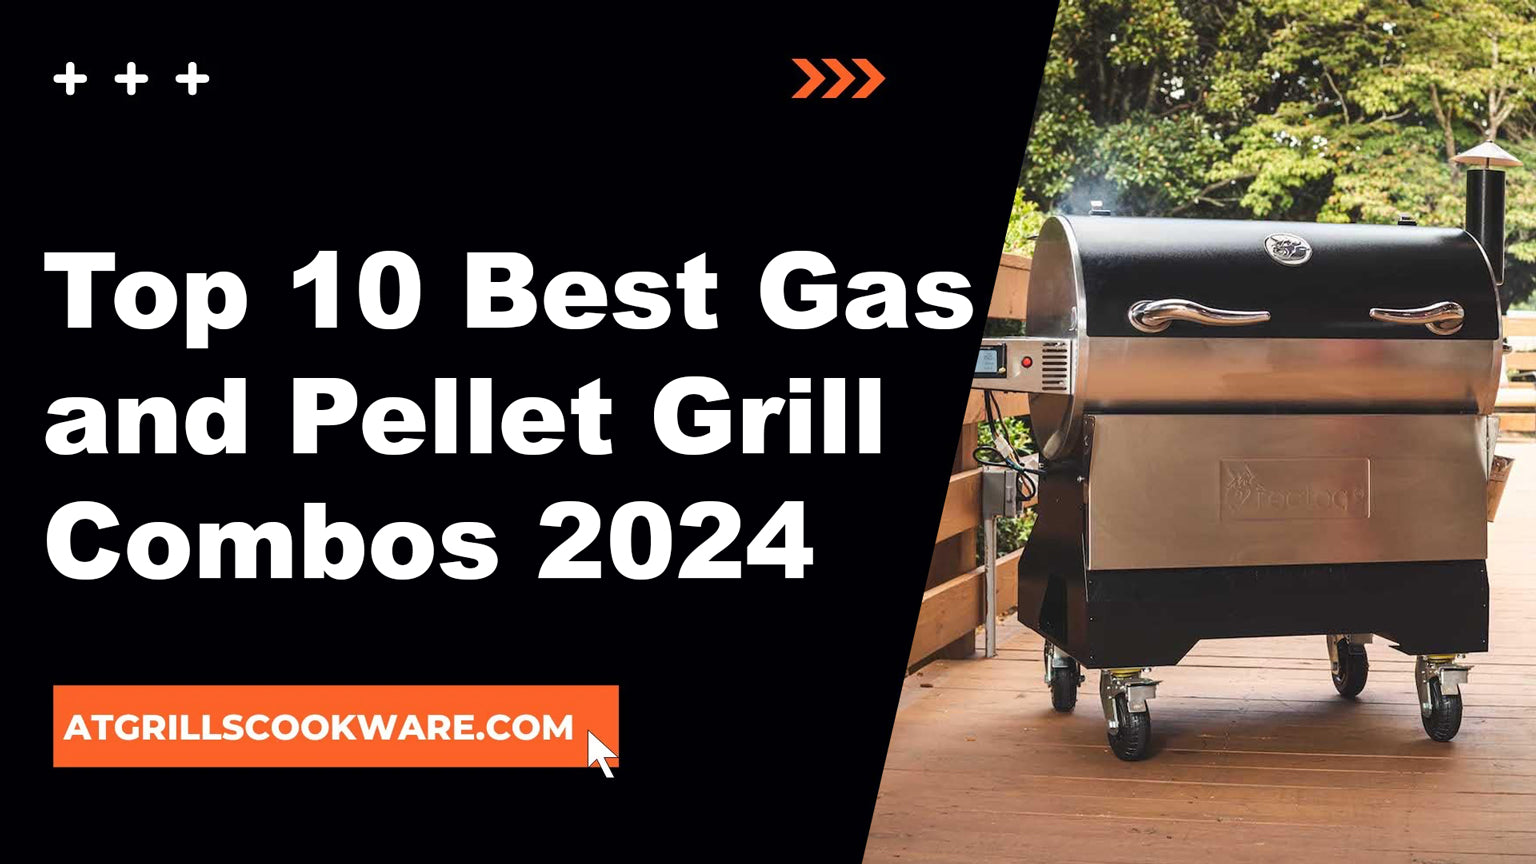 Top 10 Best Gas and Pellet Grill Combos 2024